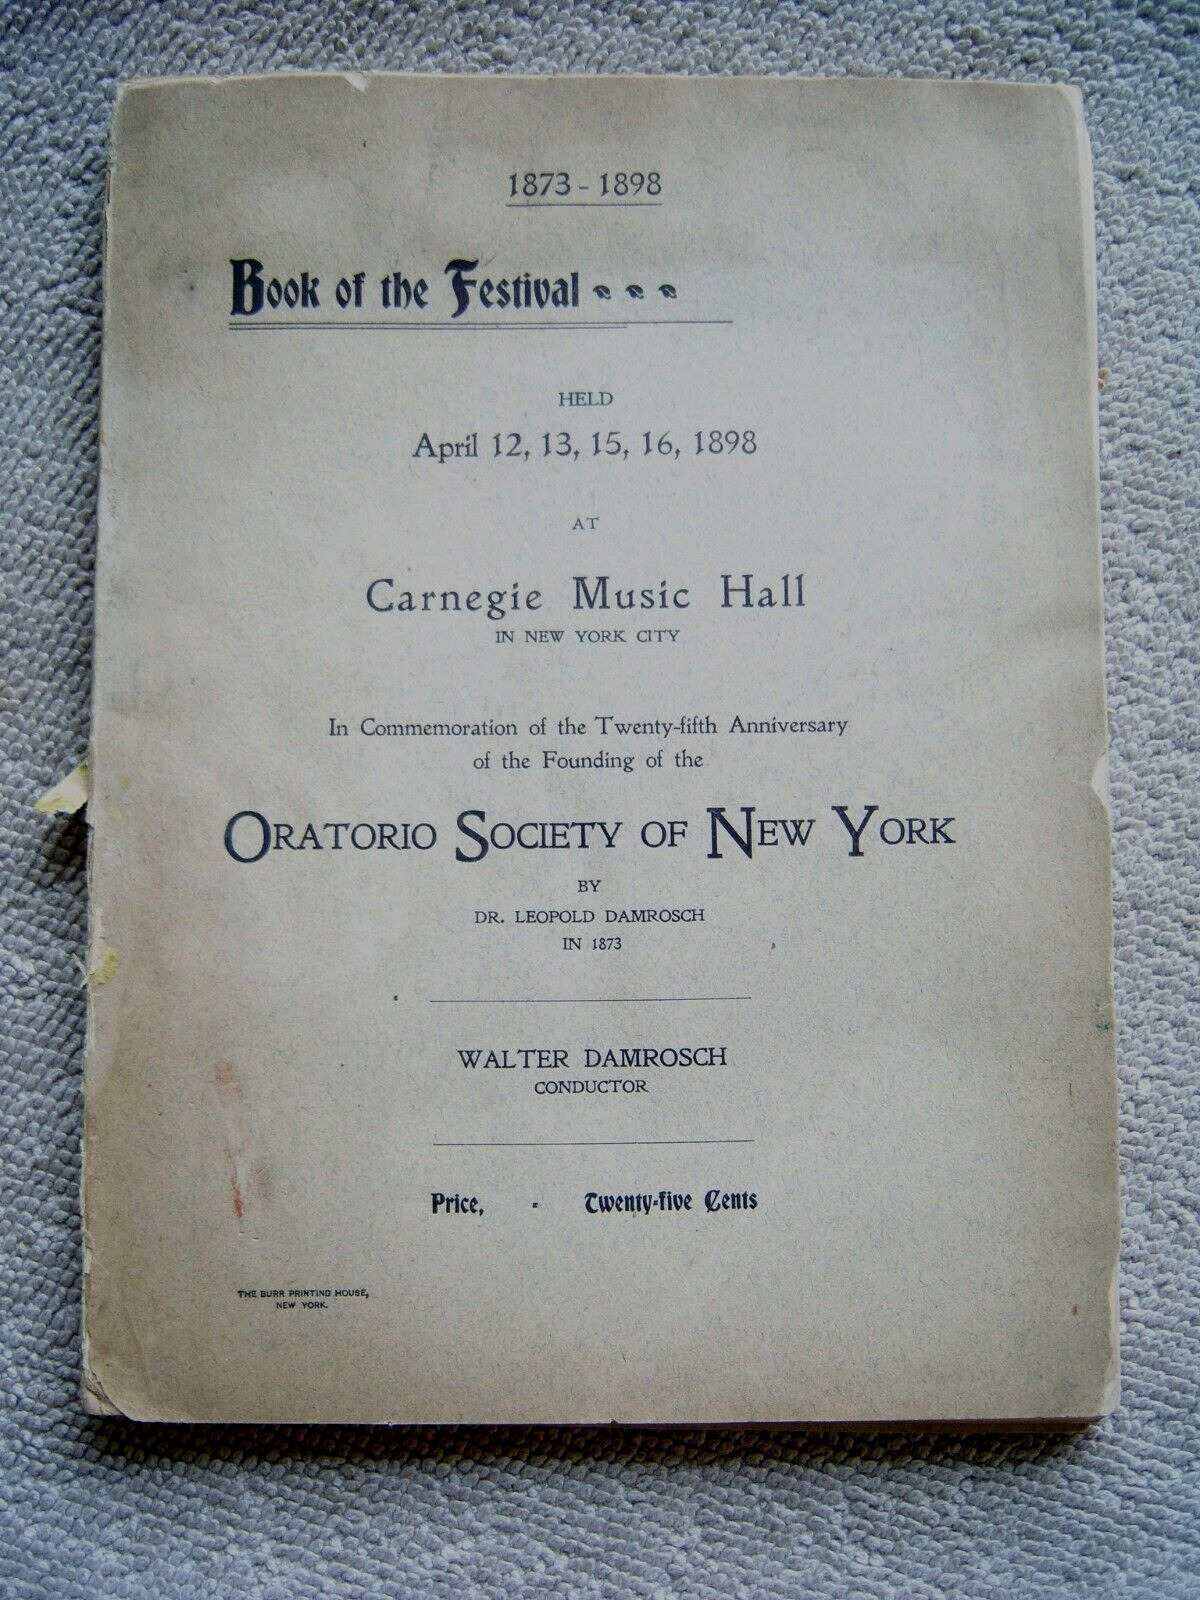 ORATORIO SOCIETY OF NEW YORK BOOK OF THE FESTIVAL April 1898 Carnegie Music Hall